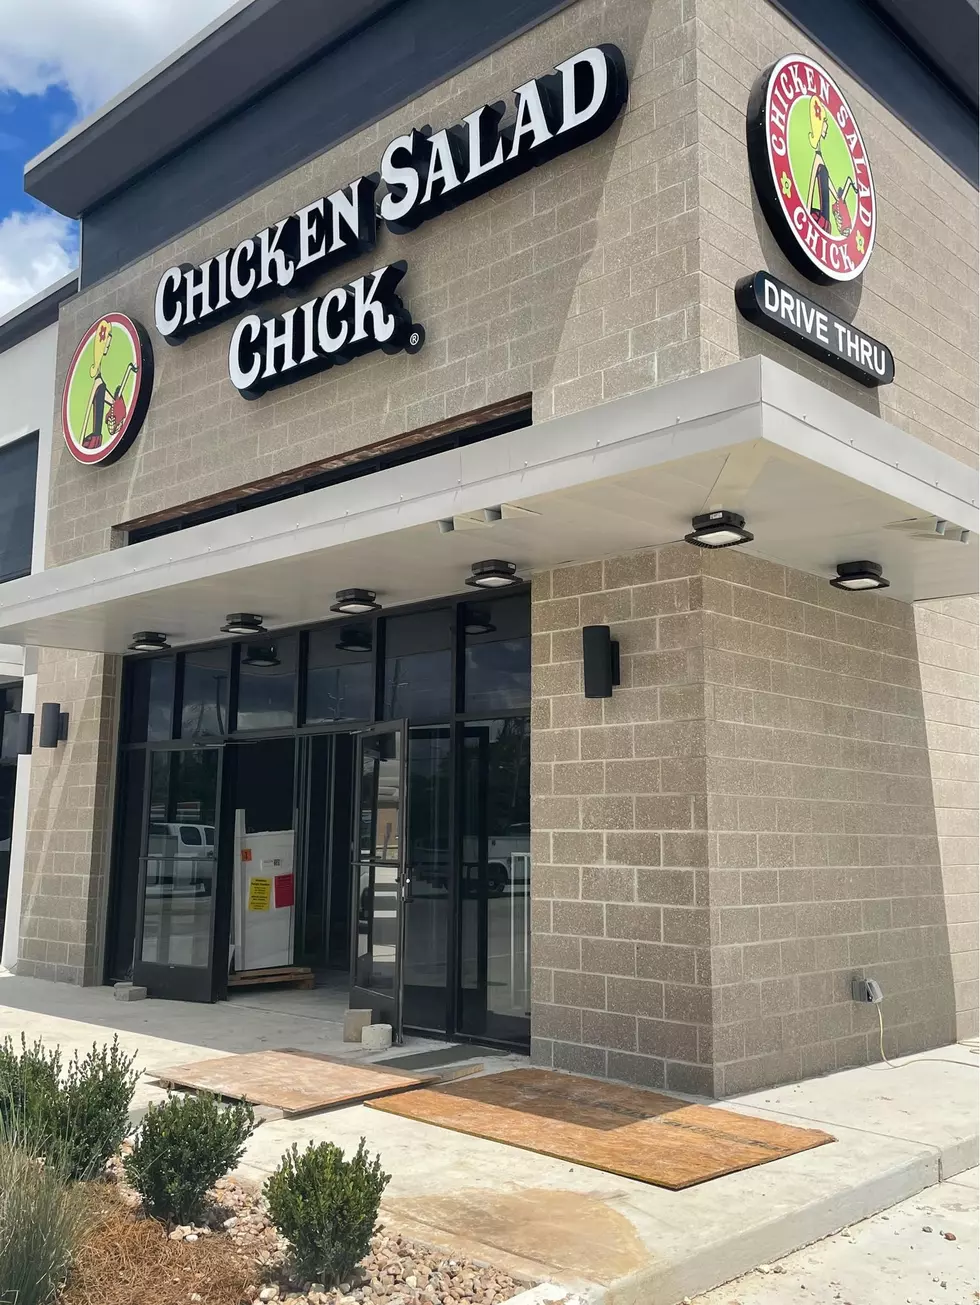 Chicken Salad Chick Grand Opening Today In Lake Charles Nov. 1